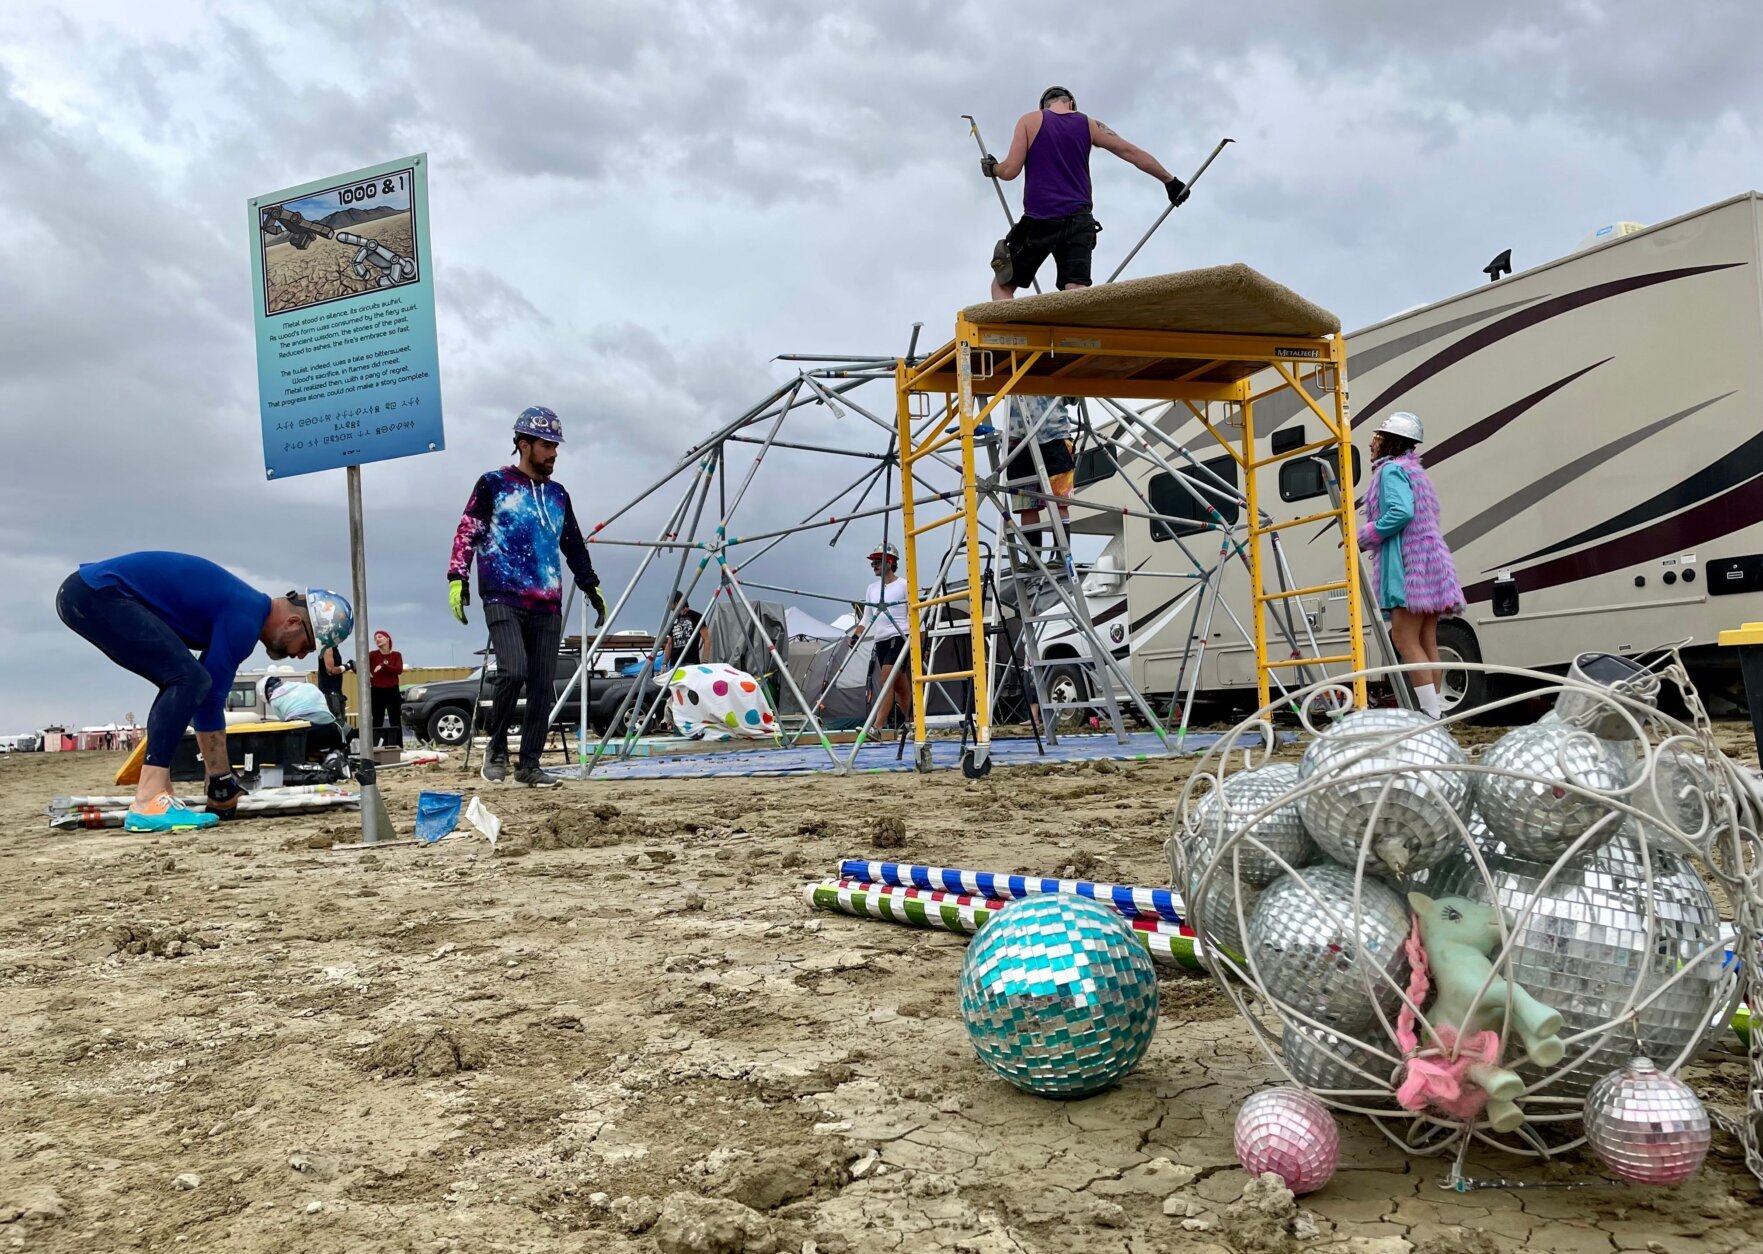 Attendees known as "burners" strike down their Unicorner camp before new rainfalls in a muddy desert plain on September 3, 2023, after heavy rains turned the annual Burning Man festival site in Nevada's Black Rock desert into a mud pit. Tens of thousands of festivalgoers were stranded September 3, in deep mud in the Nevada desert after rain turned the annual Burning Man gathering into a quagmire, with police investigating one death.
Video footage showed costume-wearing "burners" struggling across the wet gray-brown site, some using trash bags as makeshift boots, while many vehicles were stuck in the sludge. (Photo by Julie JAMMOT / AFP) (Photo by JULIE JAMMOT/AFP via Getty Images)